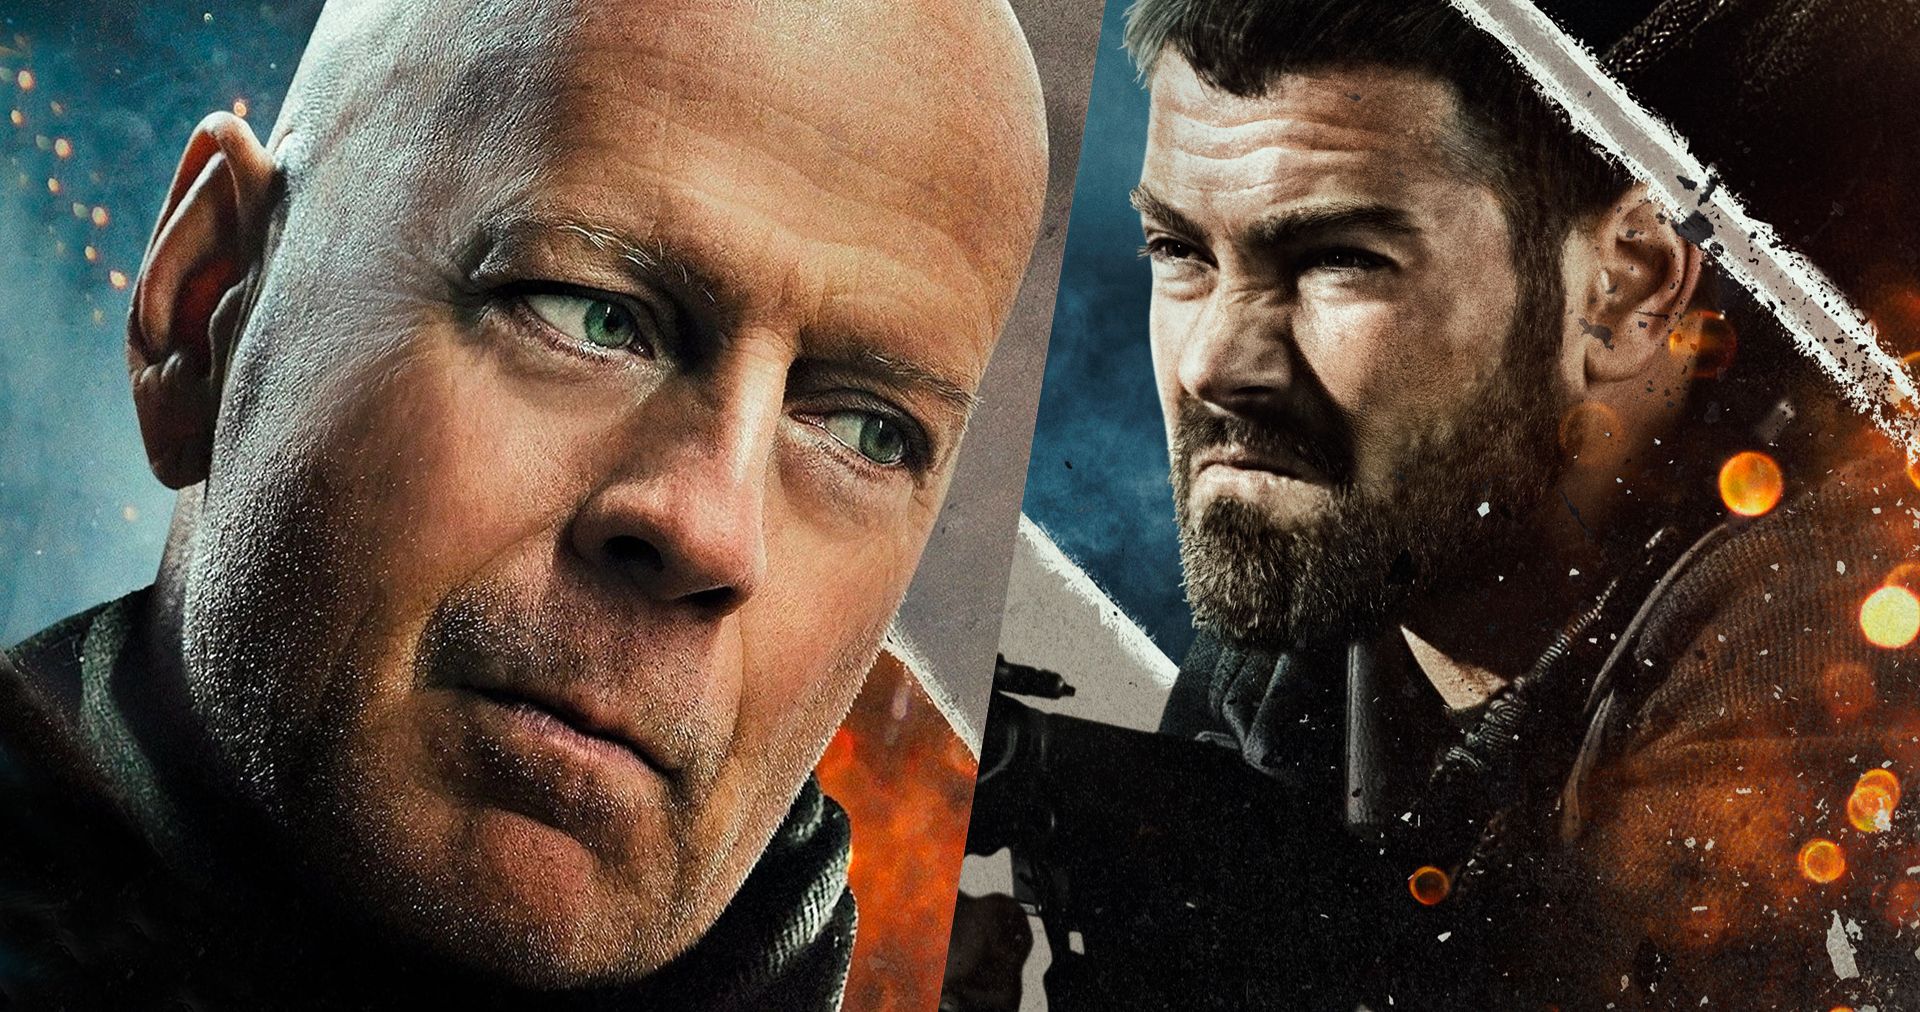 Hard Kill Preview Has Jesse Metcalfe and Bruce Willis Racing to Protect the Fate of the World